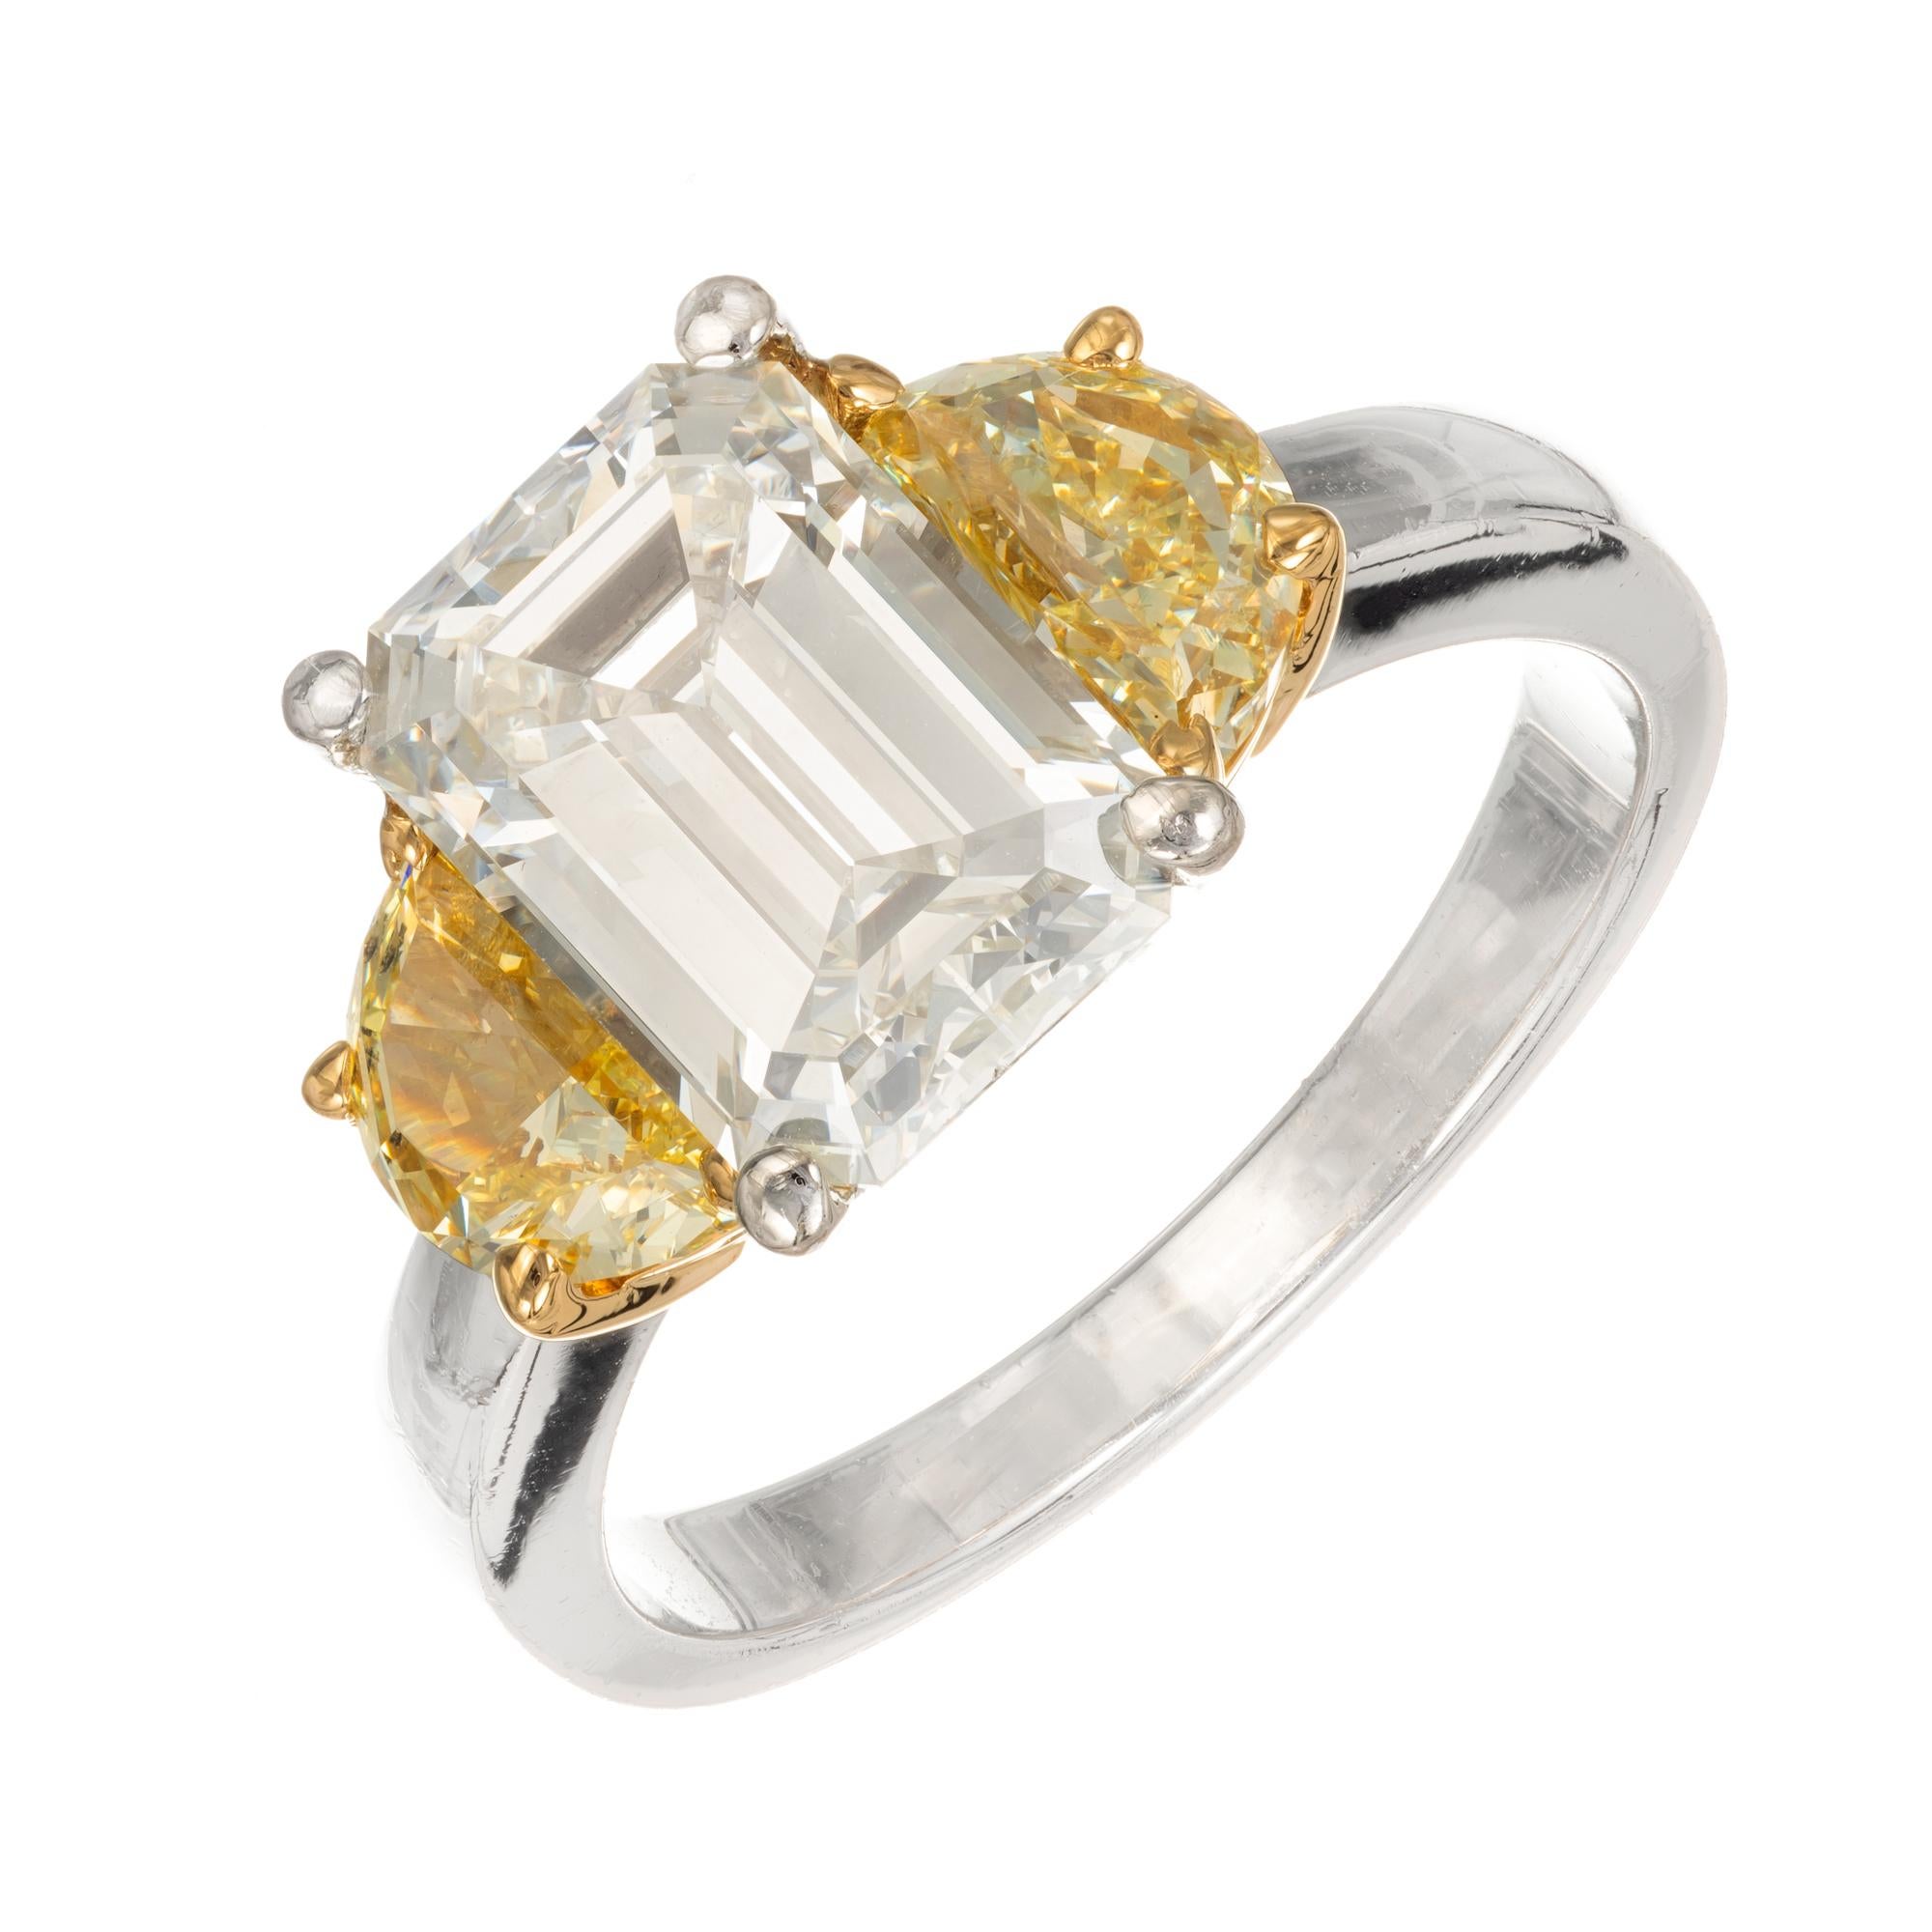 Emerald step cut diamond and half moon diamond three-stone engagement ring. GIA Certified center stone with two half-moon fancy yellow diamonds. Platinum setting with 18k yellow gold under the side diamonds. Created in the Peter Suchy Workshop.

1